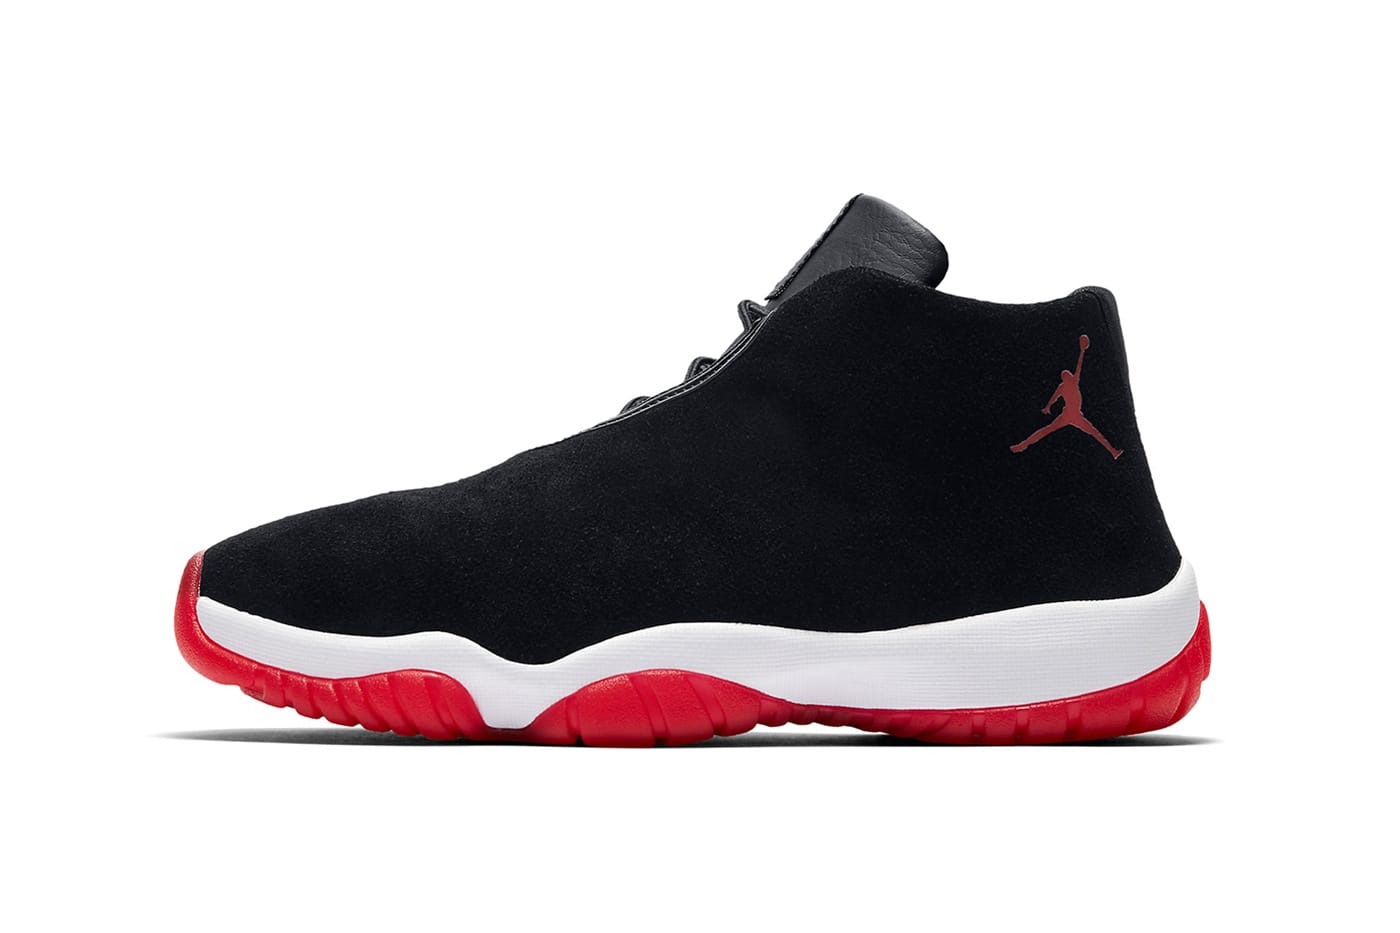 Jordan Future New Colorway Releases for 